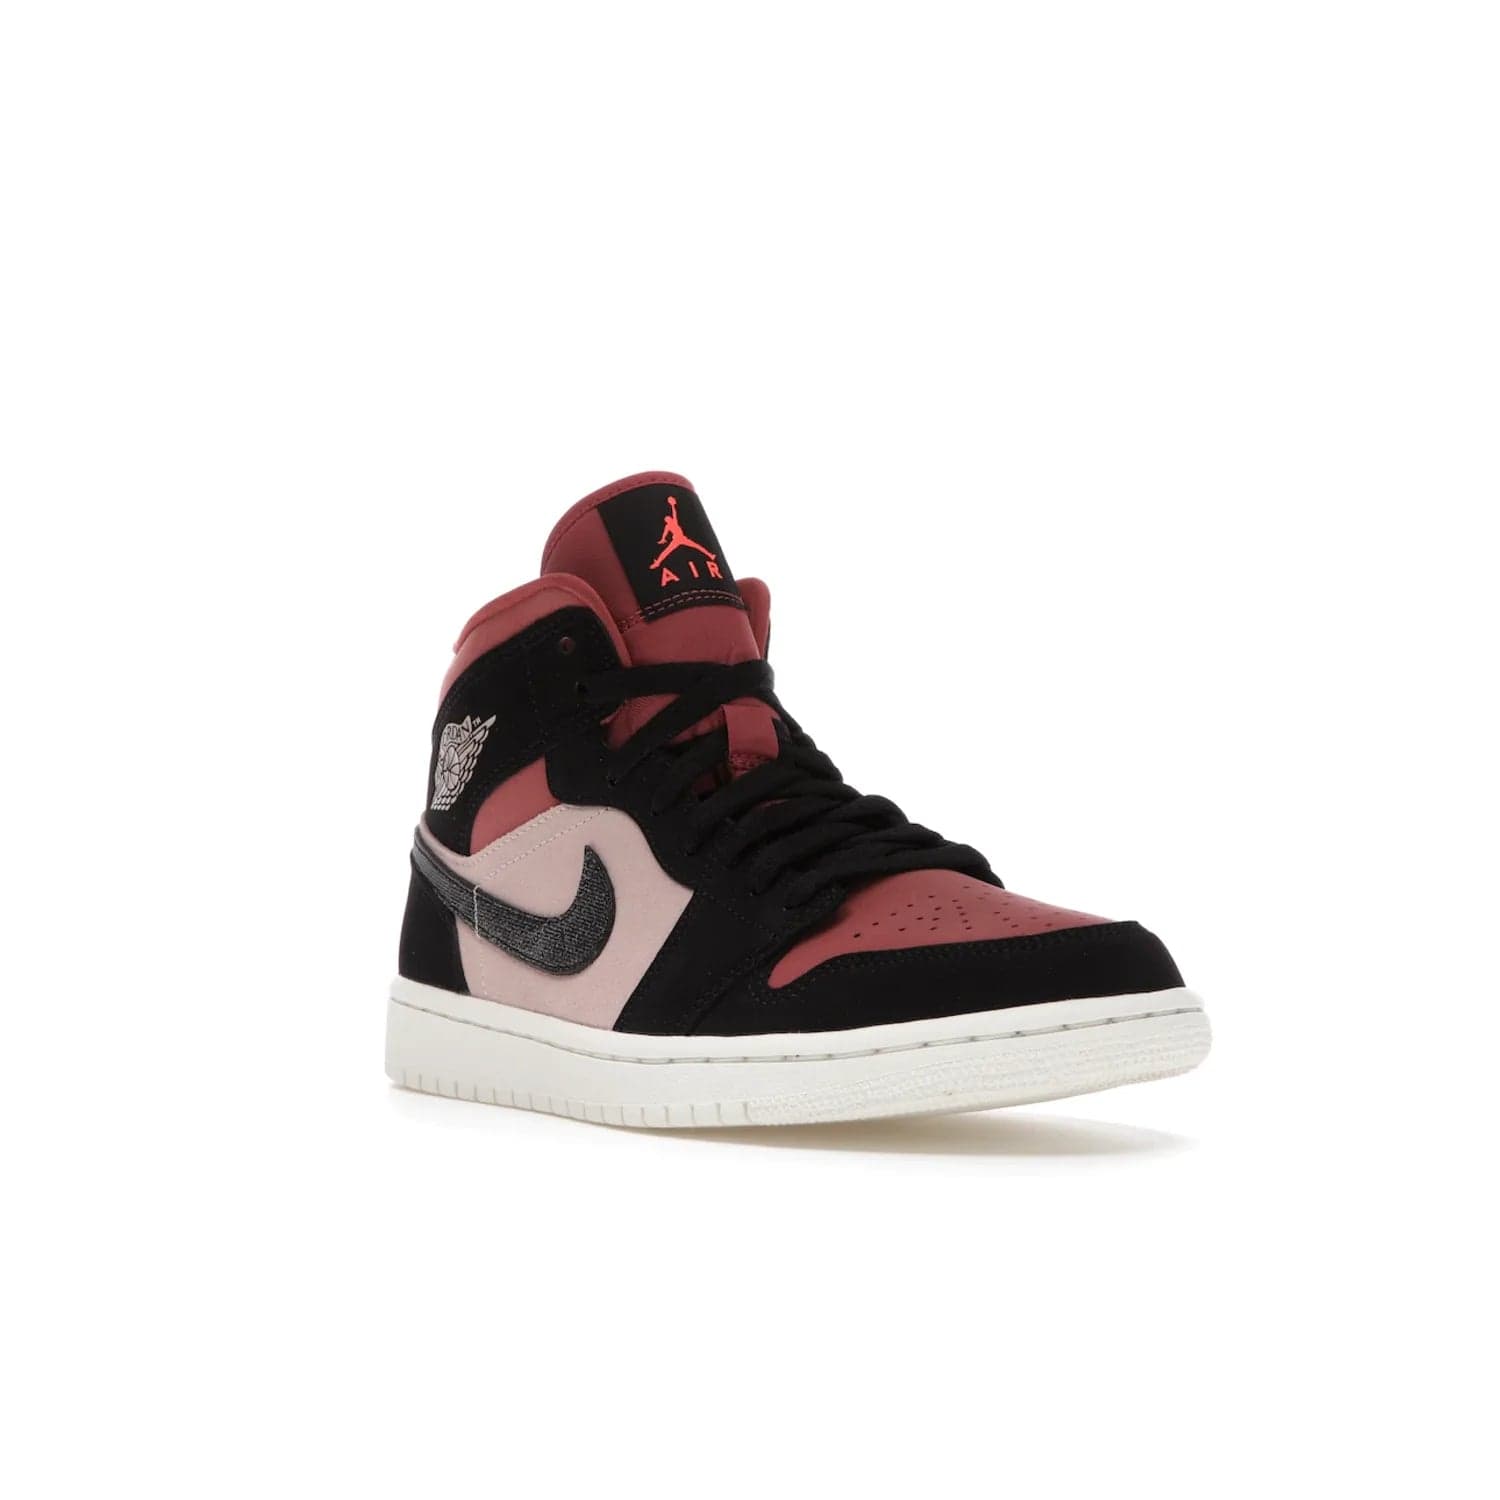 Jordan 1 Mid Canyon Rust (Women's) - Image 6 - Only at www.BallersClubKickz.com - The Air Jordan 1 Mid Canyon Rust for Women (W) is a stylish mid-top sneaker with distressed Nike swooshes and a white rubber cupsole. Featuring a blend of particle beige, canyon rust, sail and black, this versatile design will provide you with amazing comfort and style. Out now, 1st March 2021!